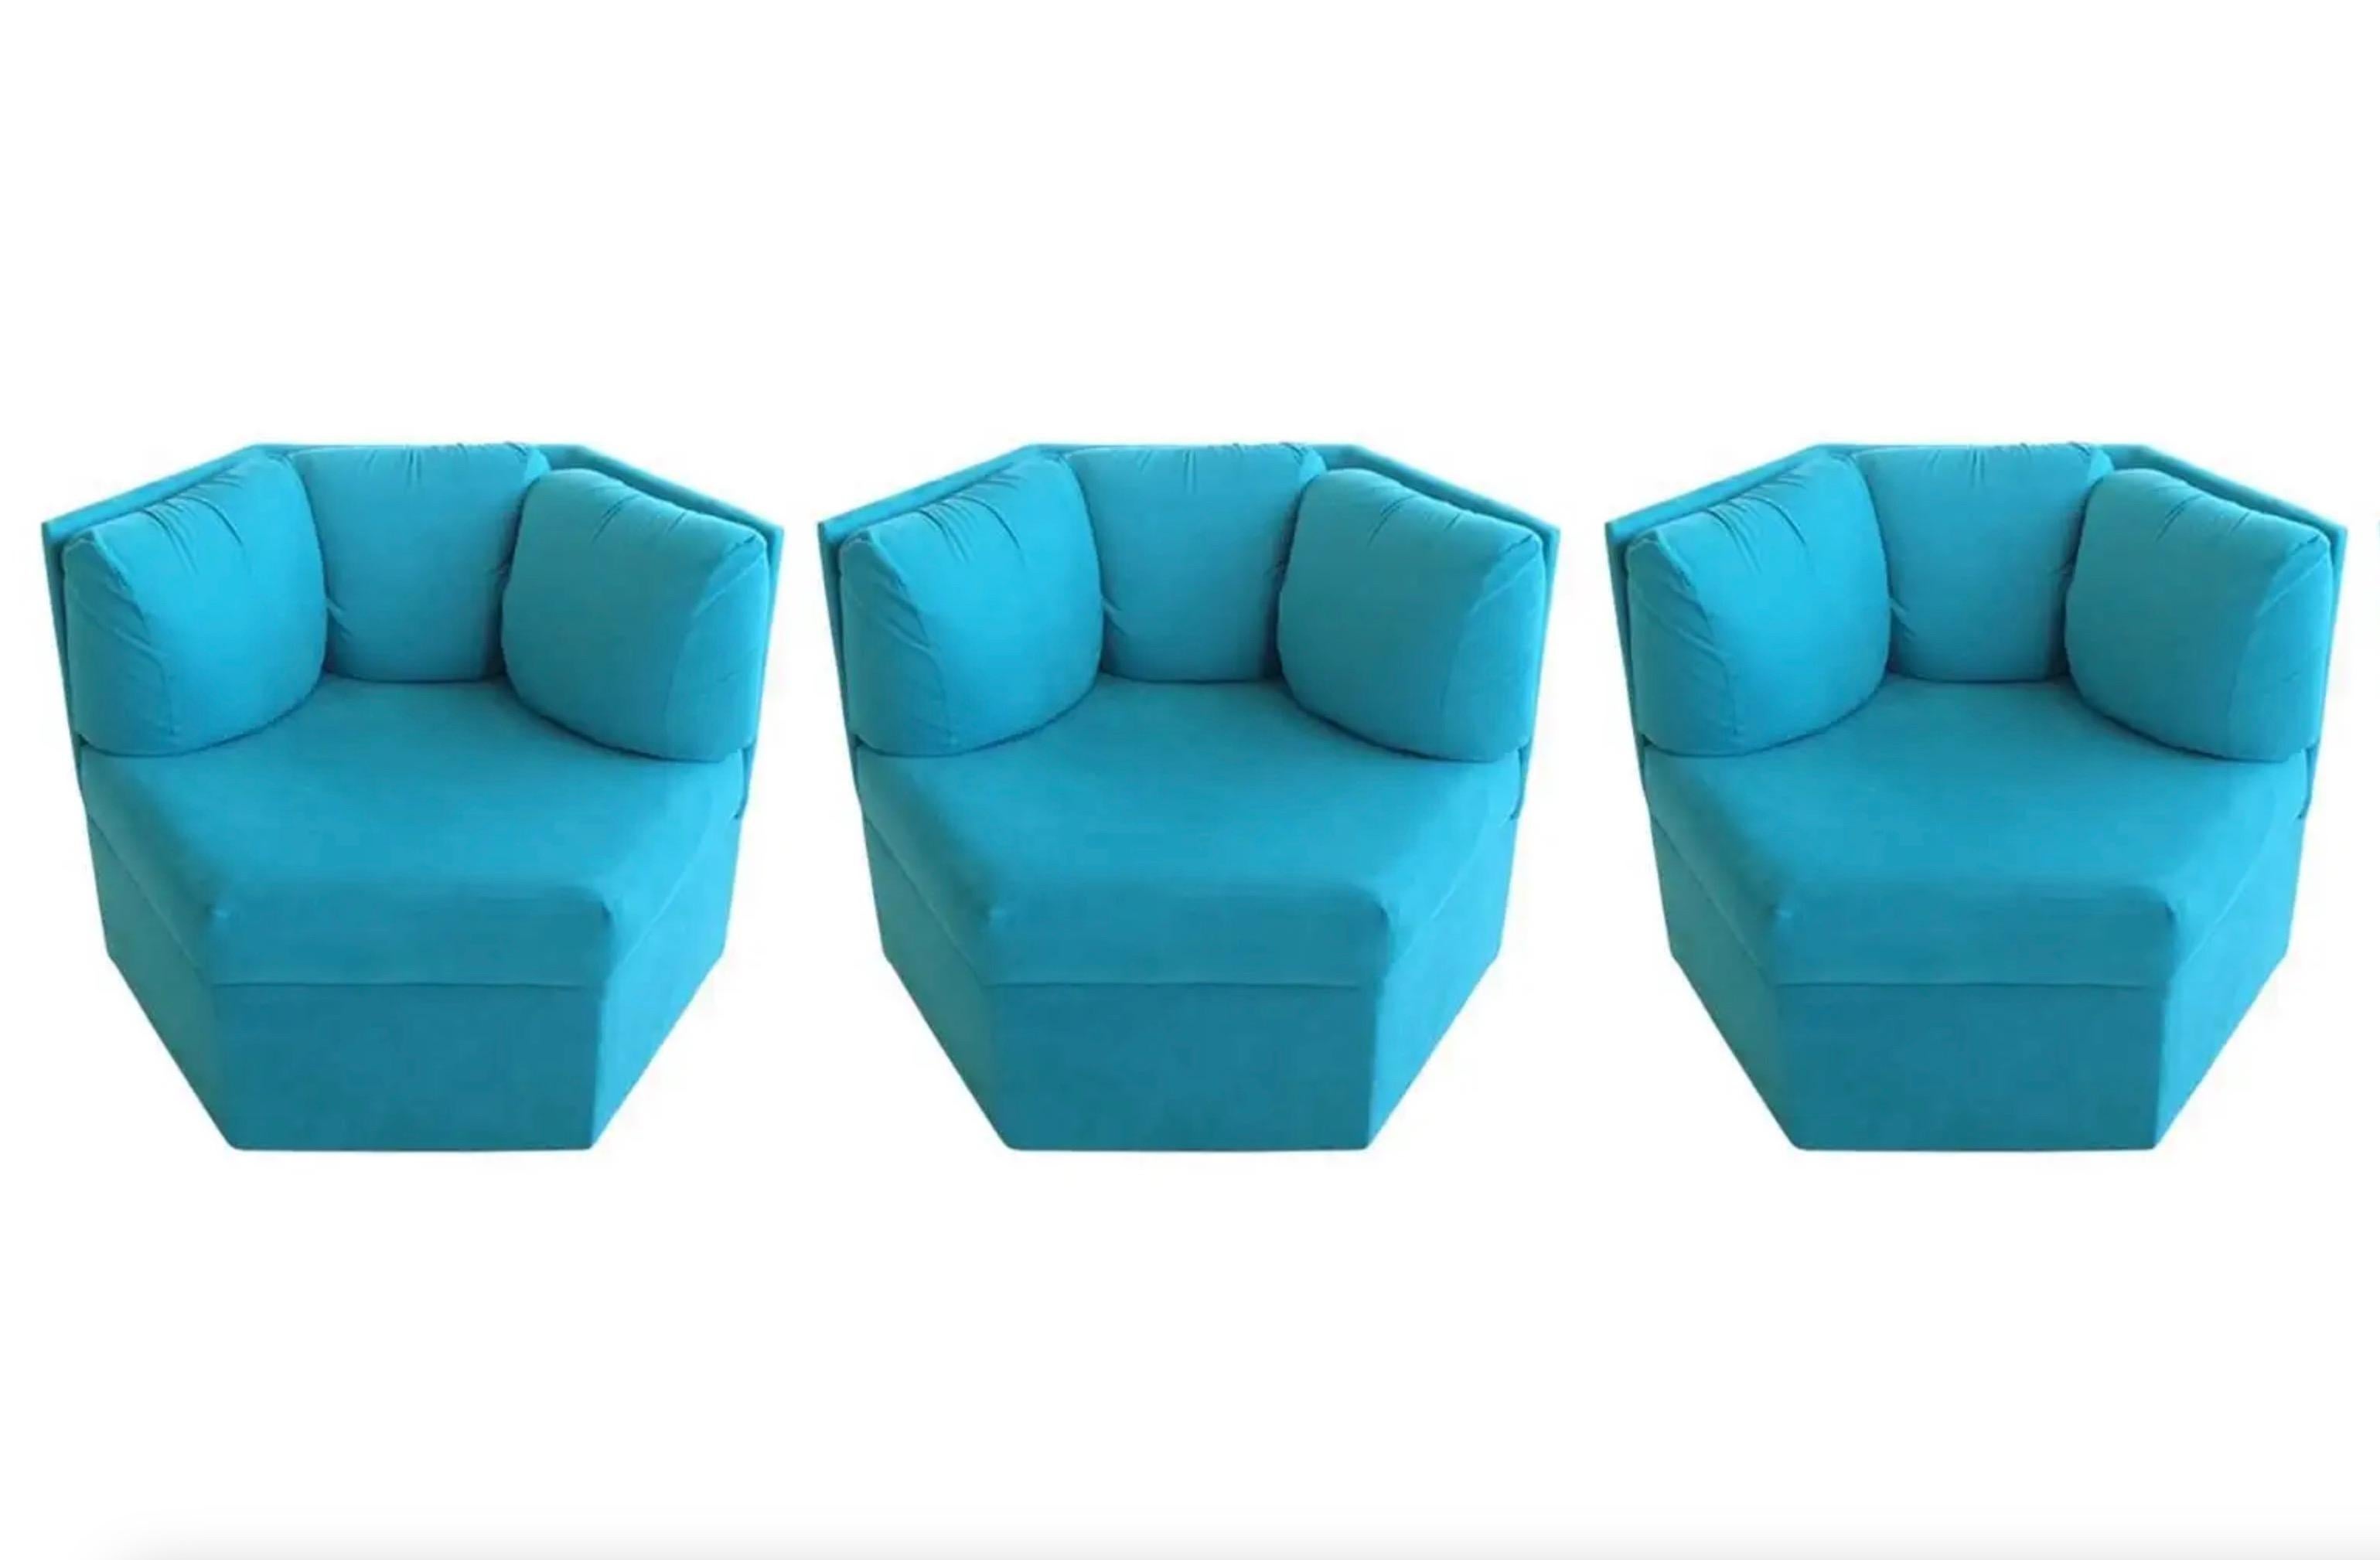 Three Milo Baughman for Thayer Coggin hexagonal swivel club chairs upholstered in turquoise/teal ultra suede. 
Like brand new. 
Attached triple back cushions and attached seat cushion.
360 degree swivel base.
These three priced individually and can